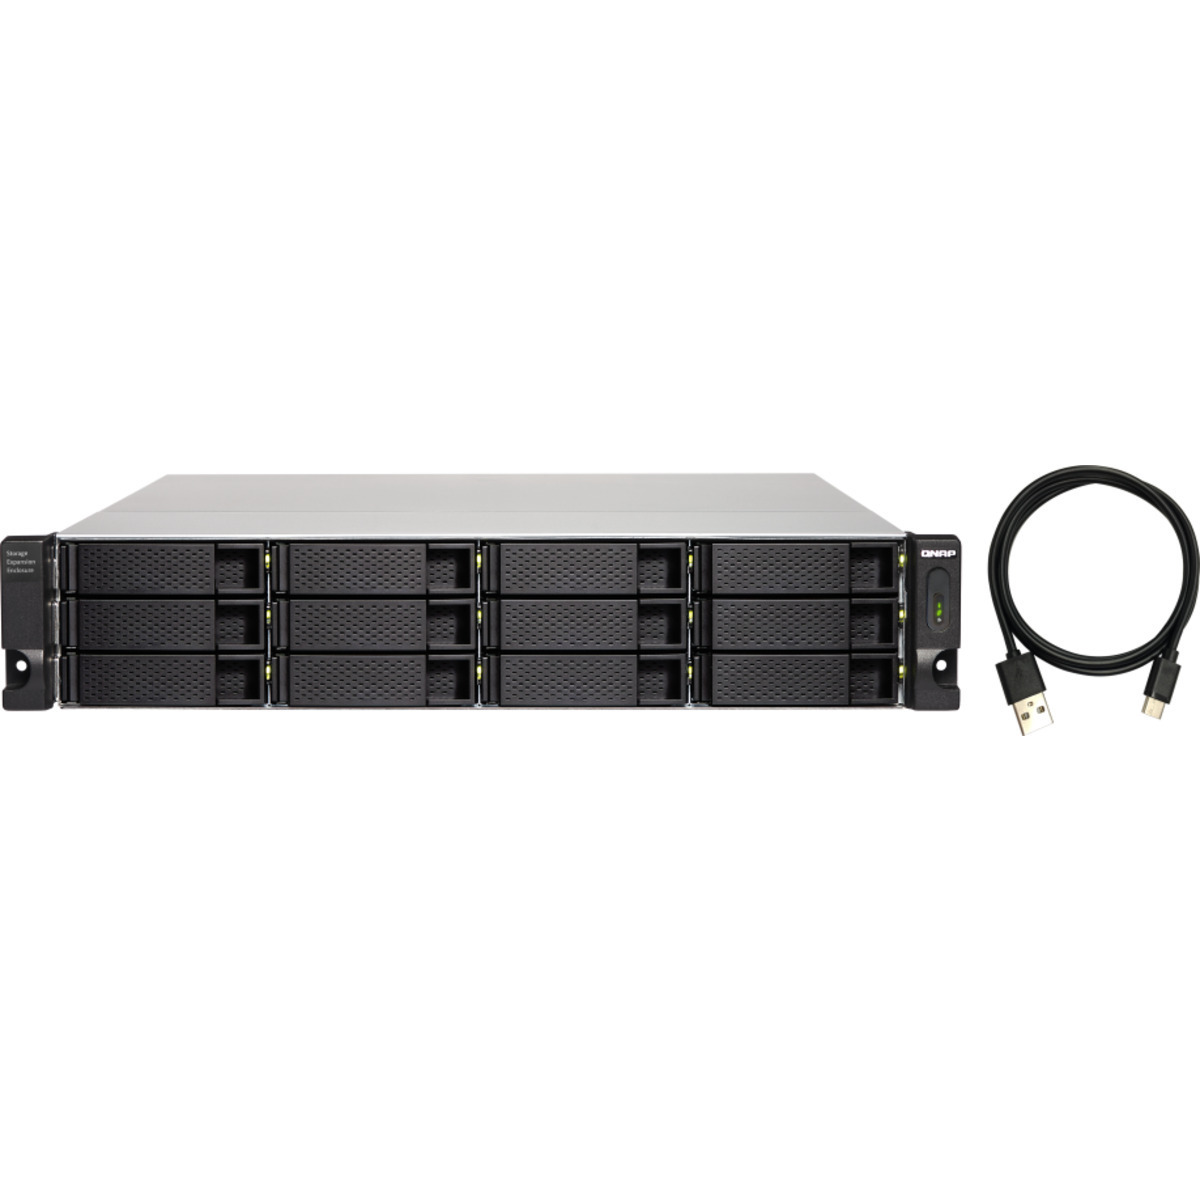 QNAP TL-R1200C-RP External Expansion Drive 40tb 12-Bay RackMount Multimedia / Power User / Business Expansion Enclosure 10x4tb Seagate IronWolf Pro ST4000NT001 3.5 7200rpm SATA 6Gb/s HDD NAS Class Drives Installed - Burn-In Tested TL-R1200C-RP External Expansion Drive